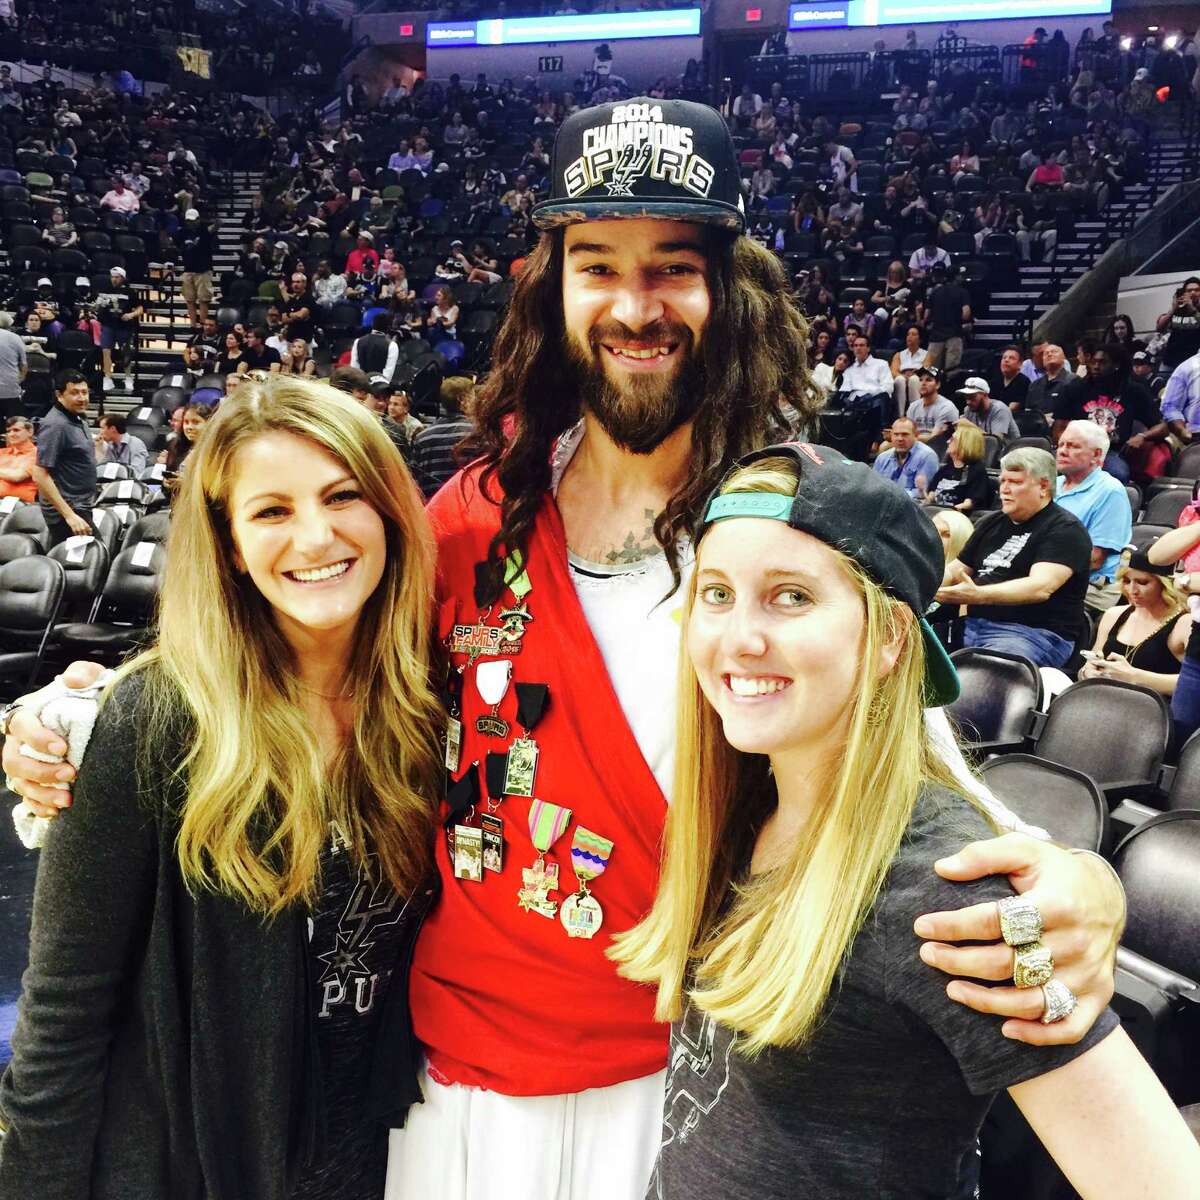 Spurs Jesus comforted the woes of Spurs fans during the wrenching loss of game 4 to the Clippers.